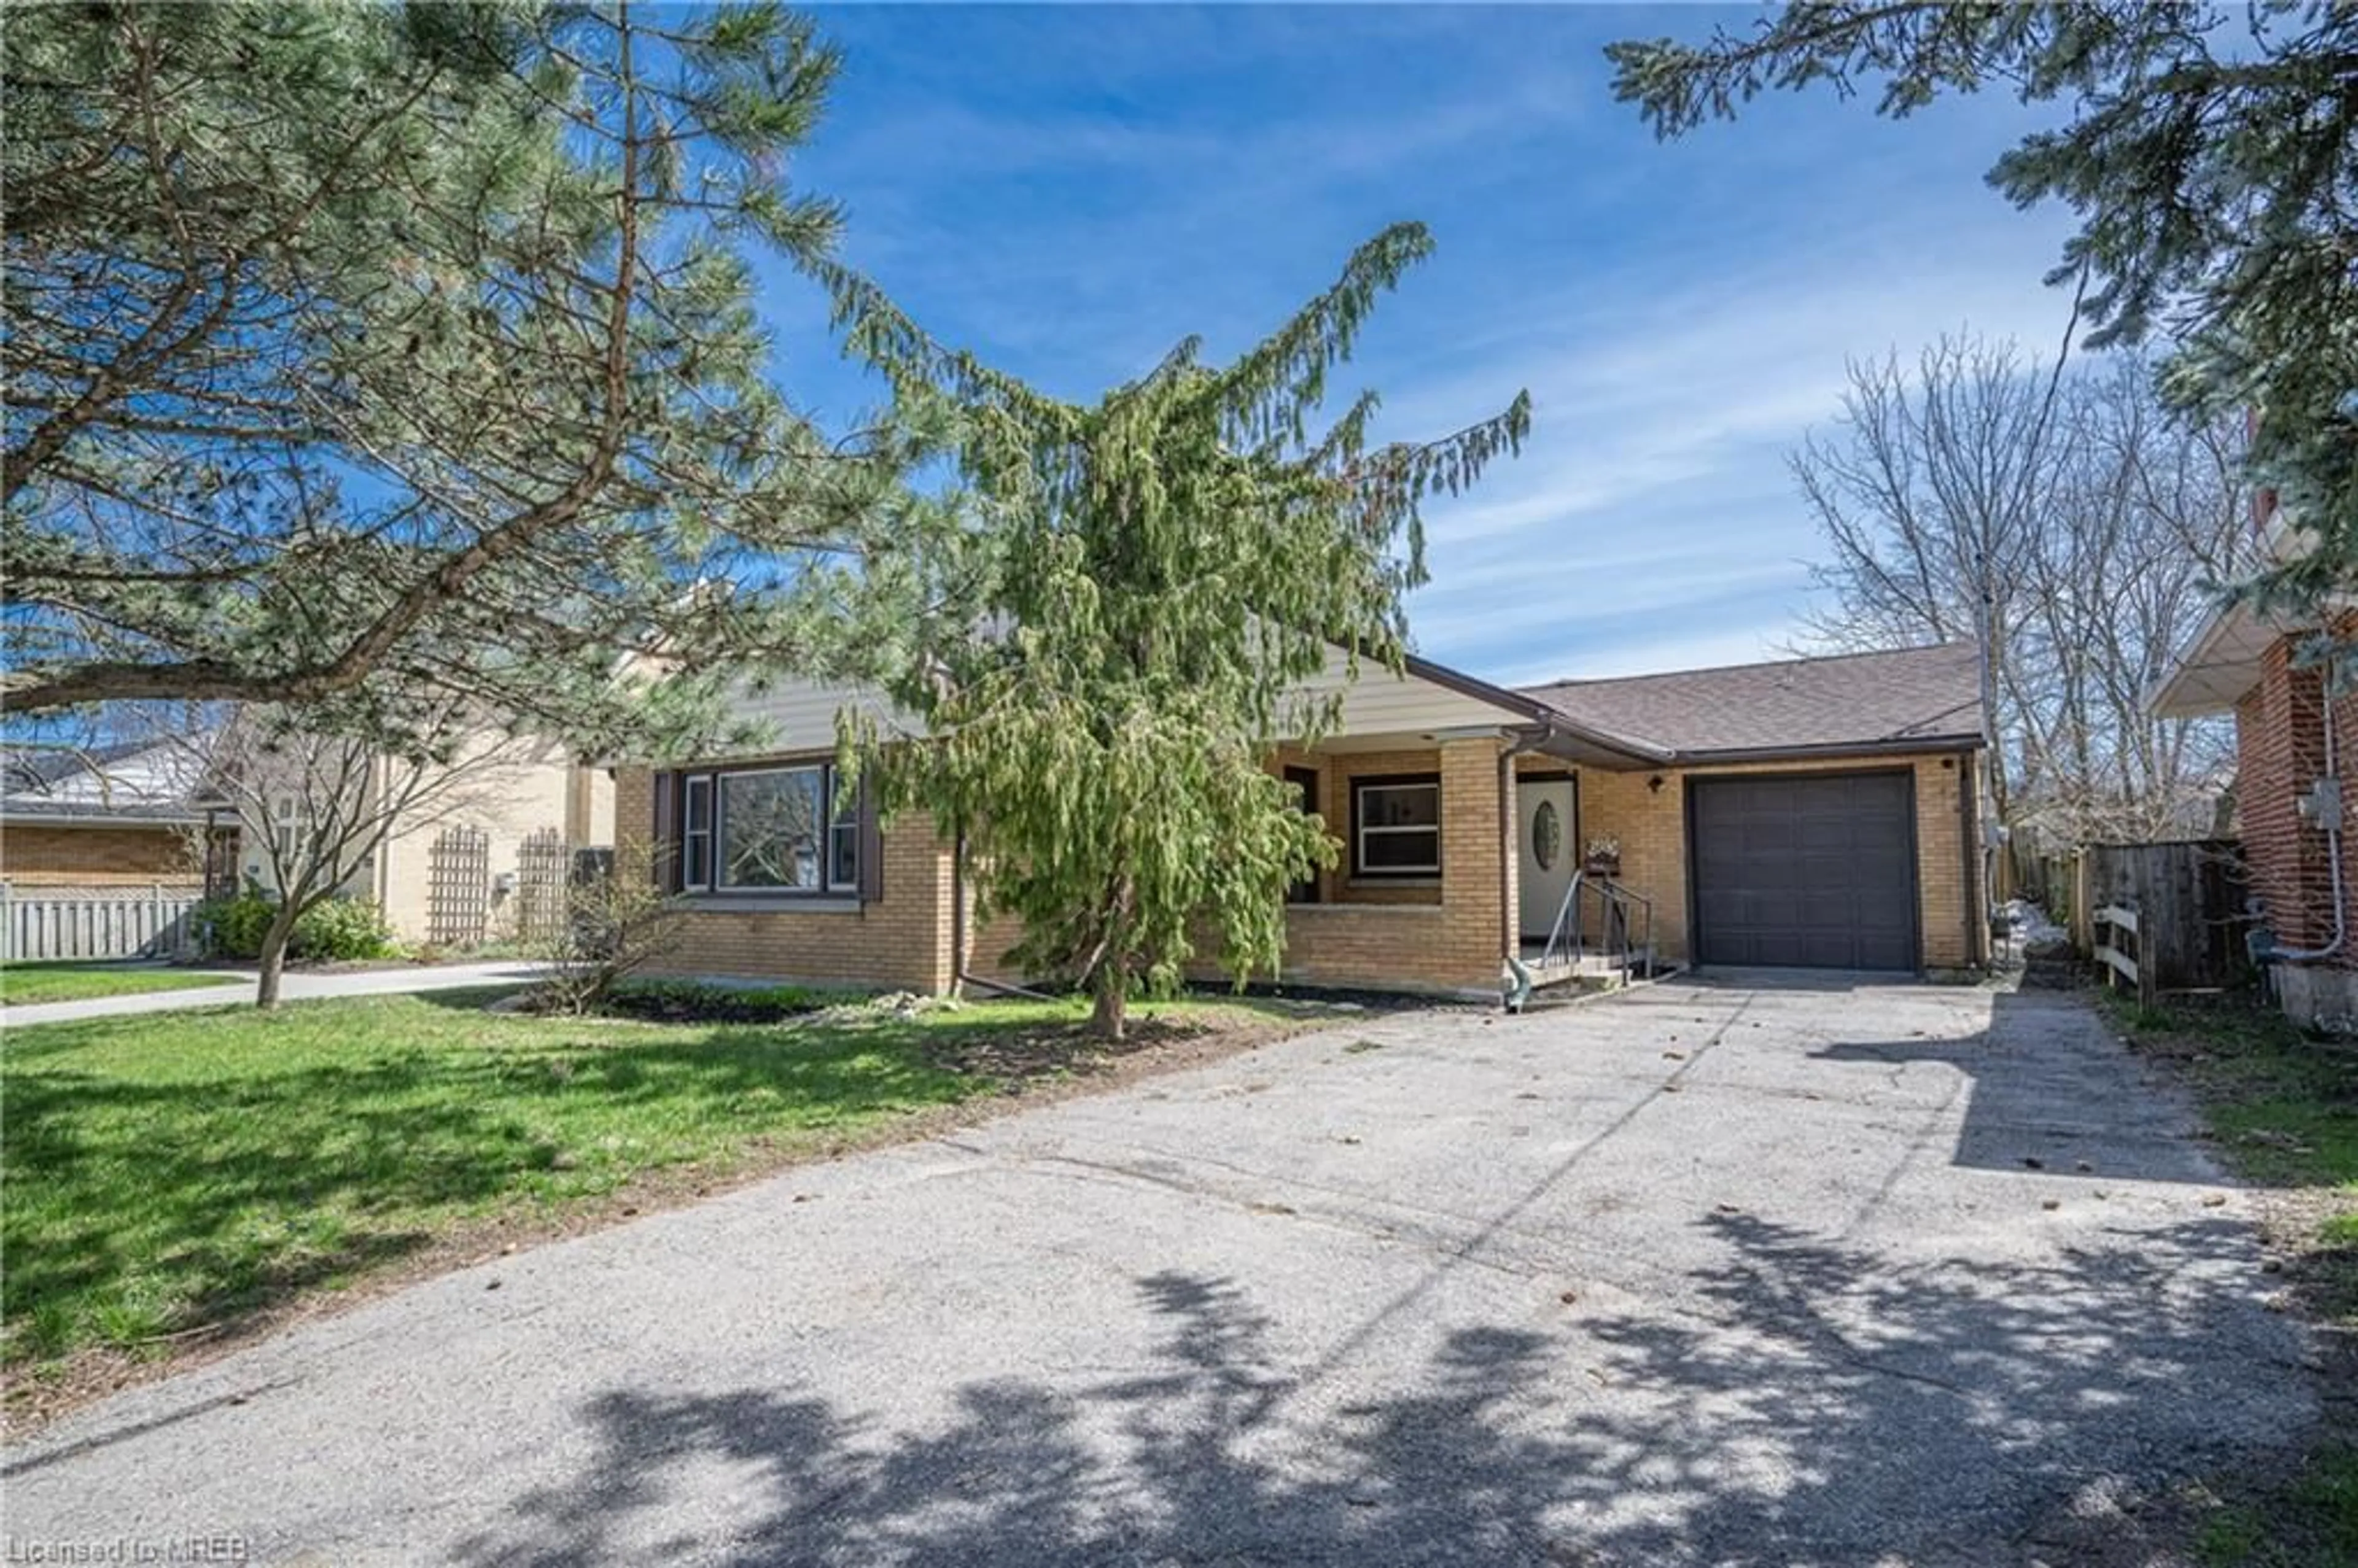 Frontside or backside of a home for 685 Frederick St, Kitchener Ontario N2B 2B3